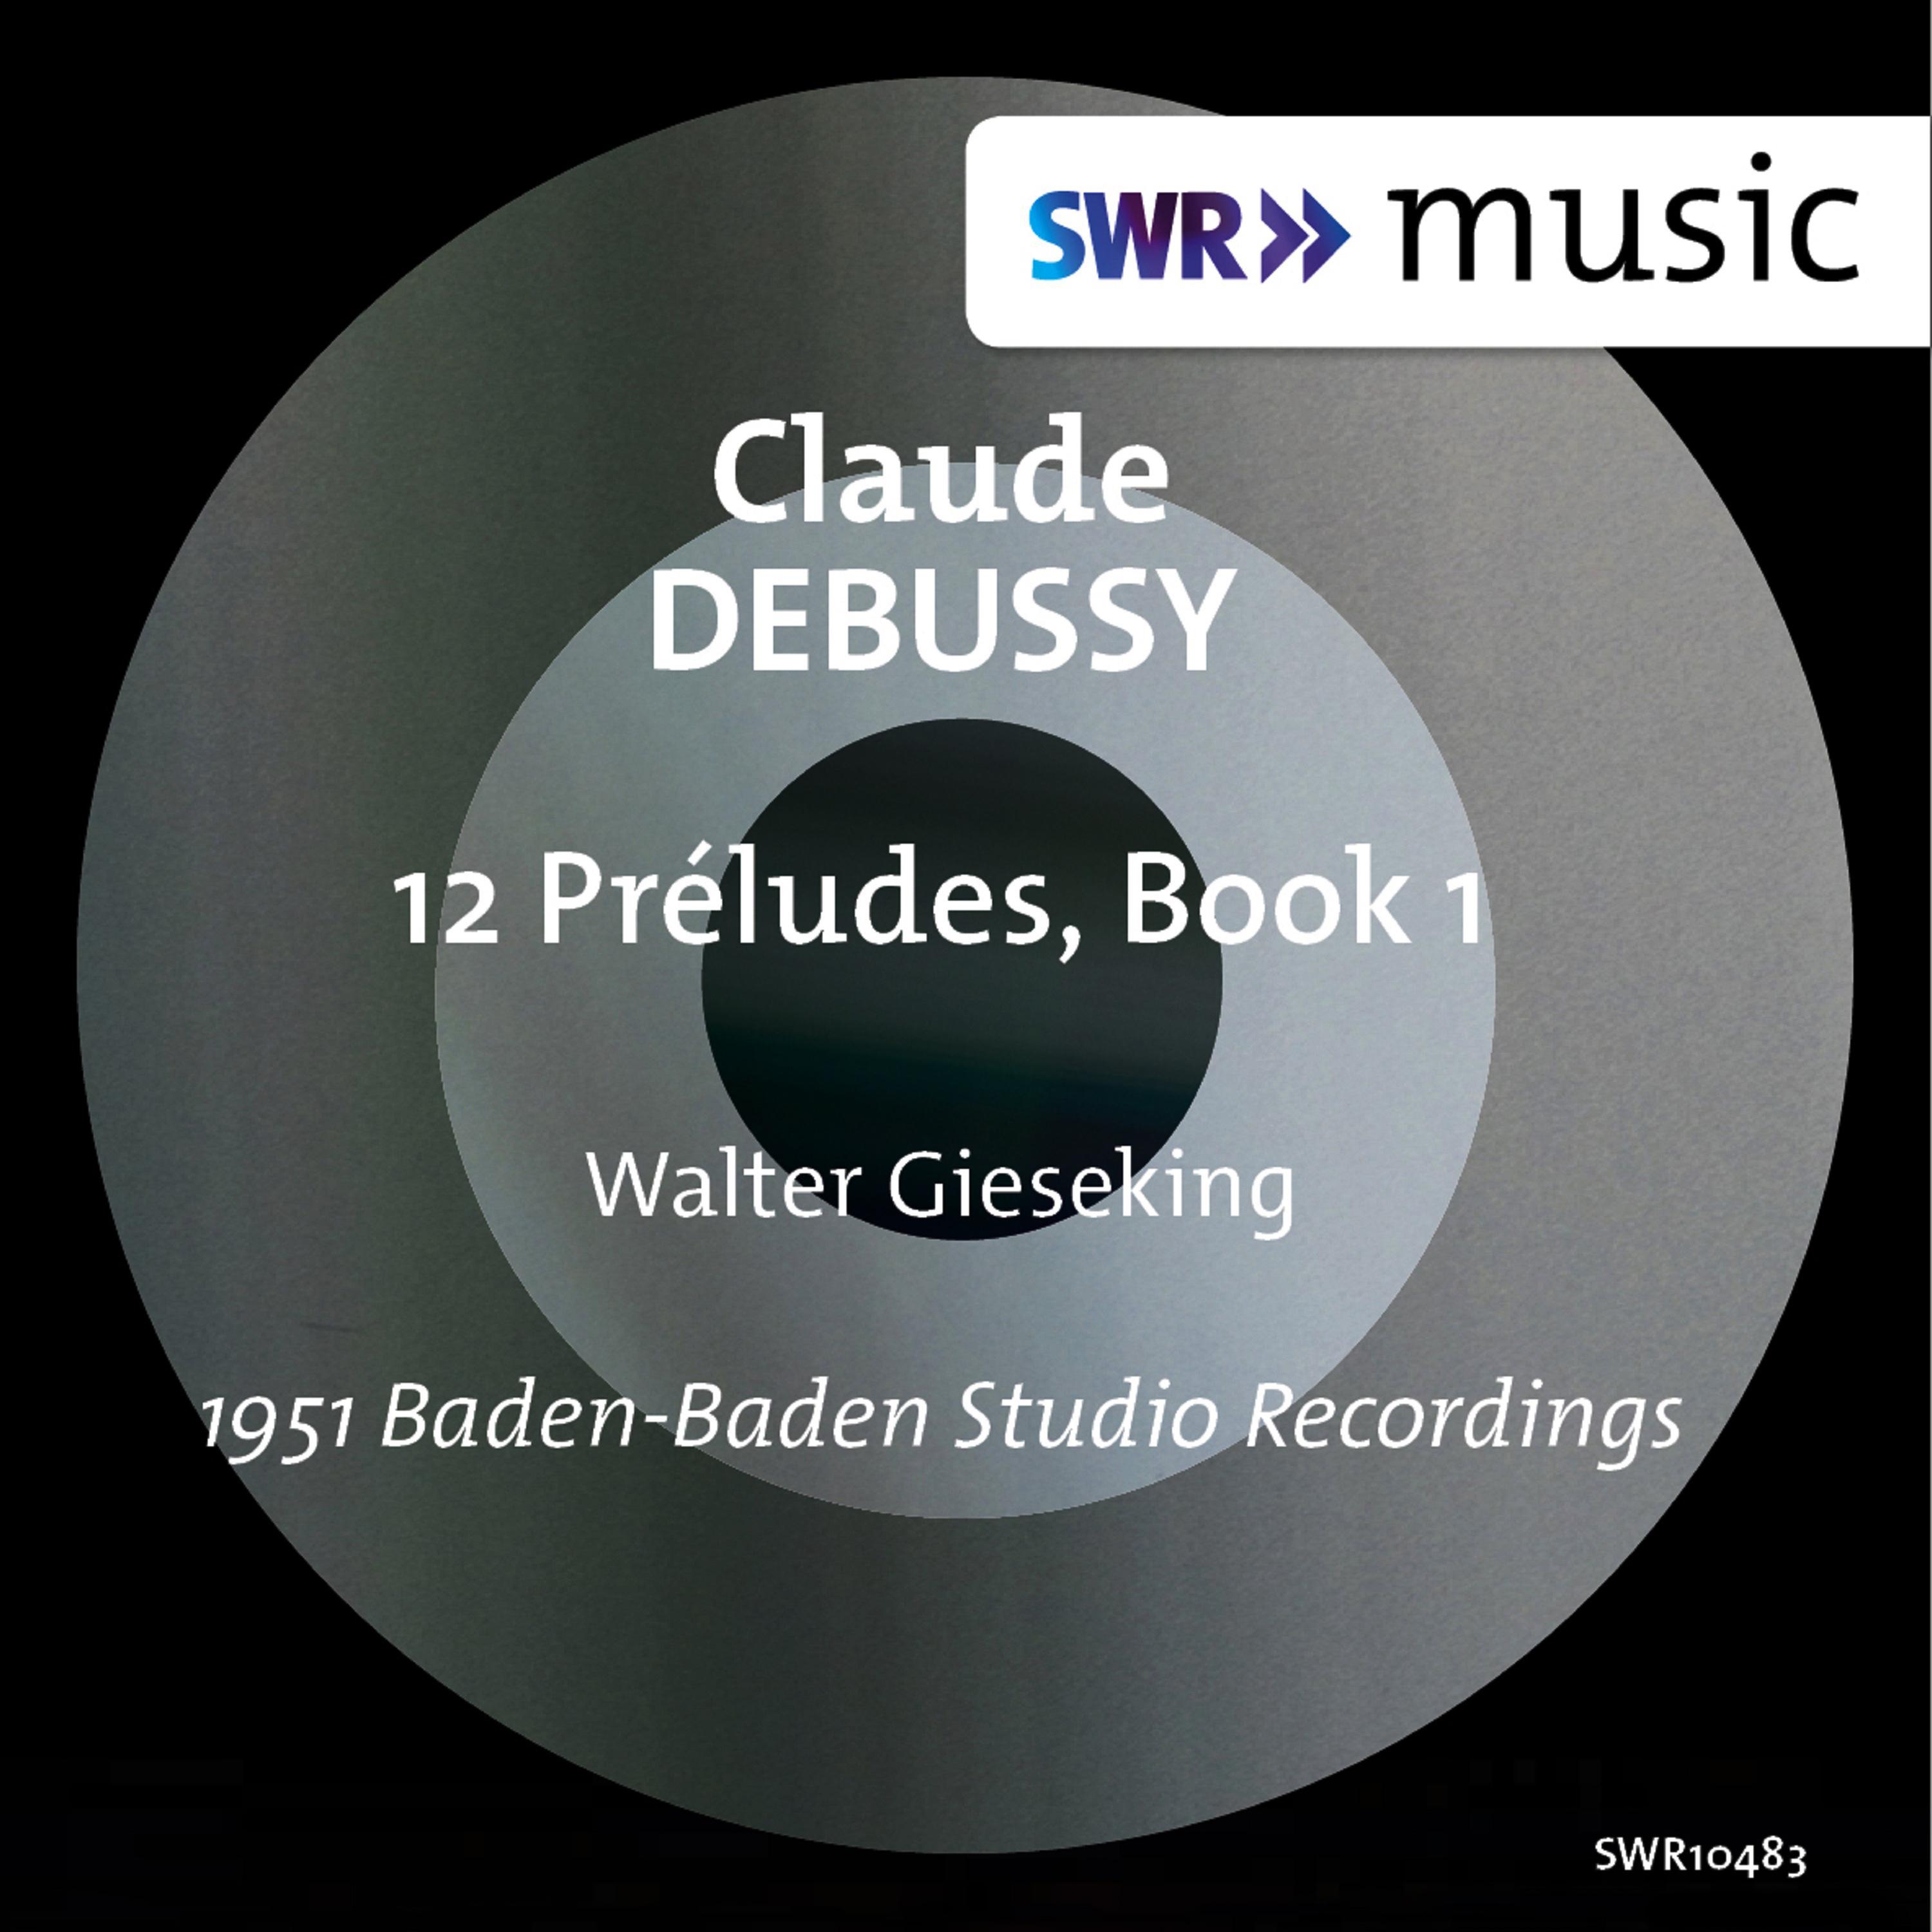 DEBUSSY, C.: Pre ludes, Book 1 Gieseking